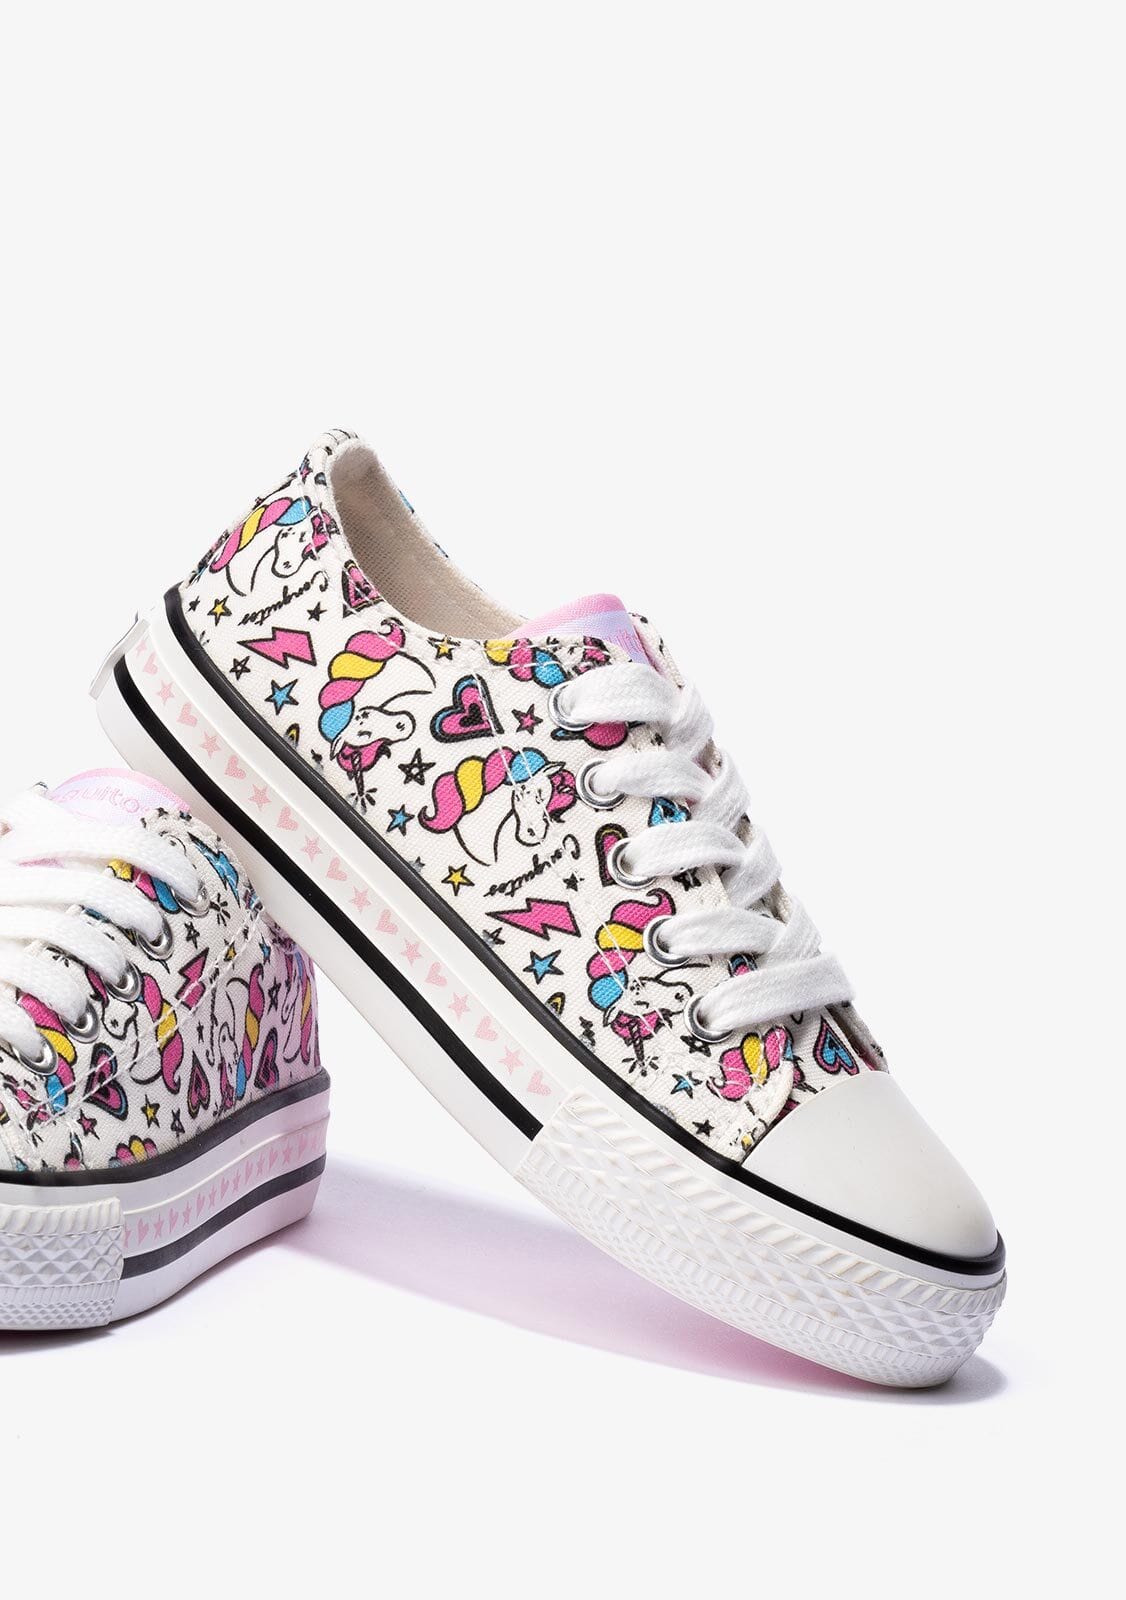 CONGUITOS Shoes Girl's White Unicorn Sneakers Canvas